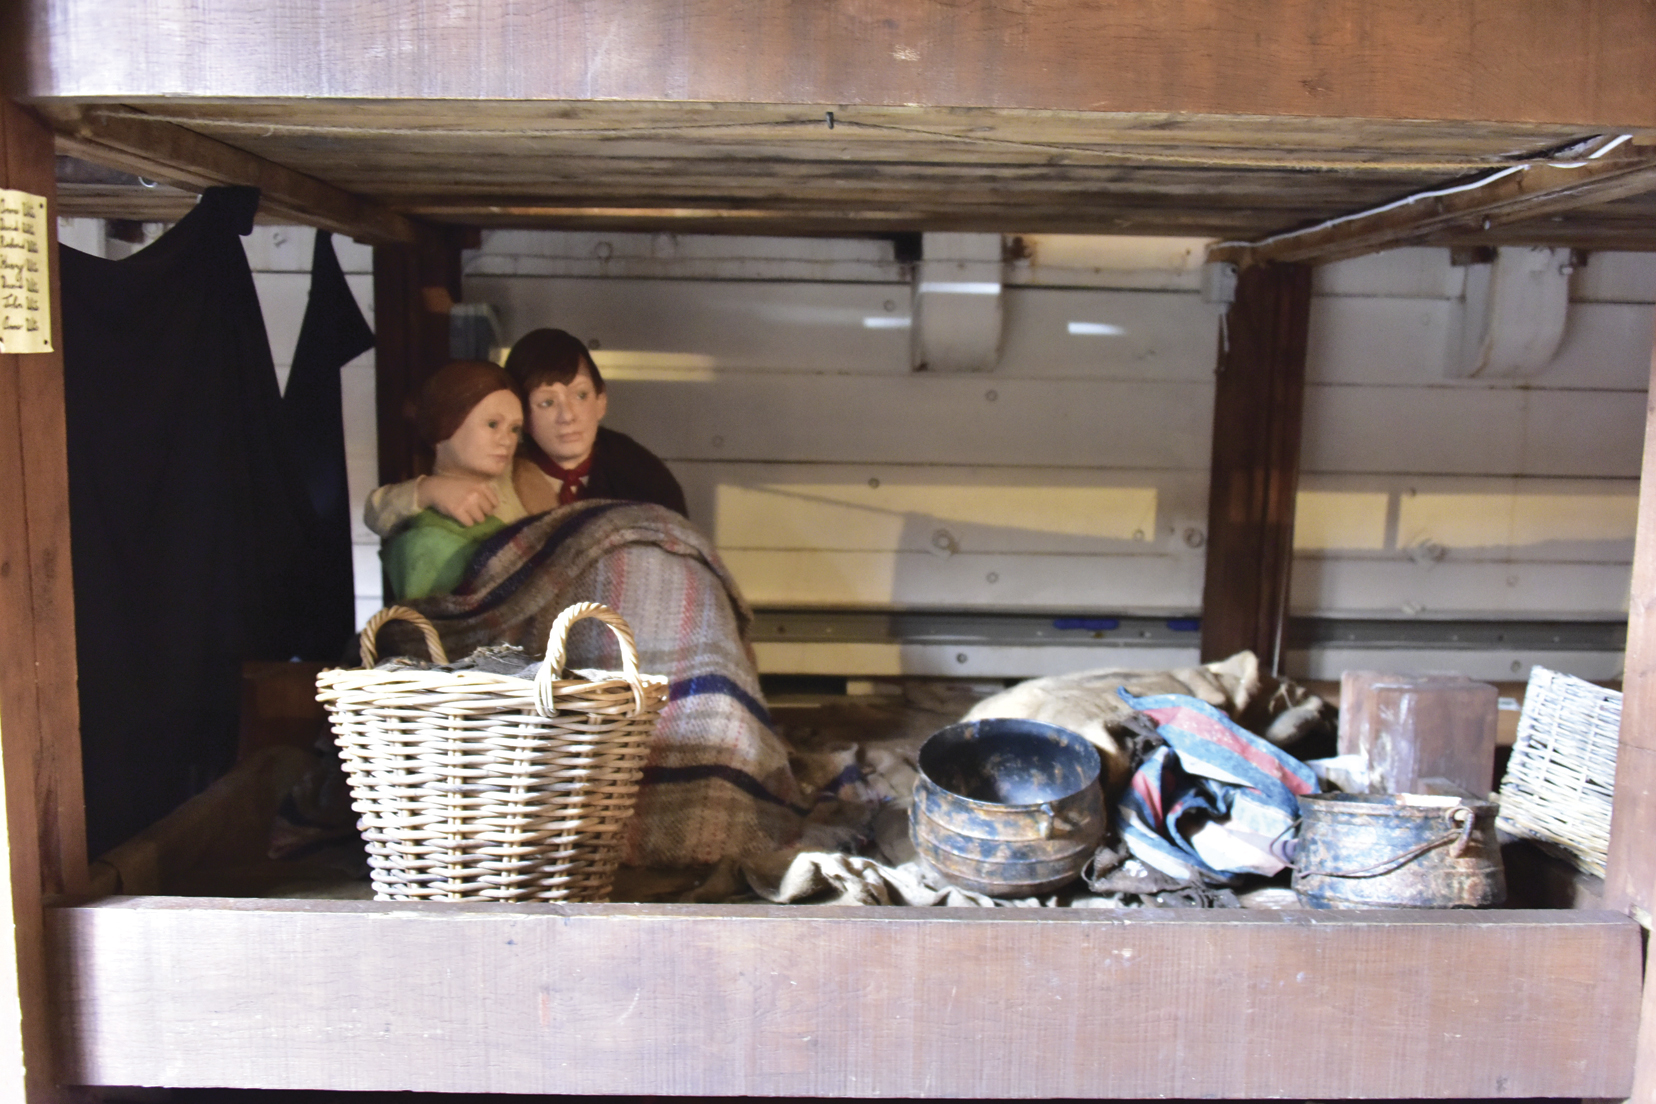 A typical “family” bunk on the Dunbrody, a replica of a Famine-era sailing ship that bought thousands to the New World.